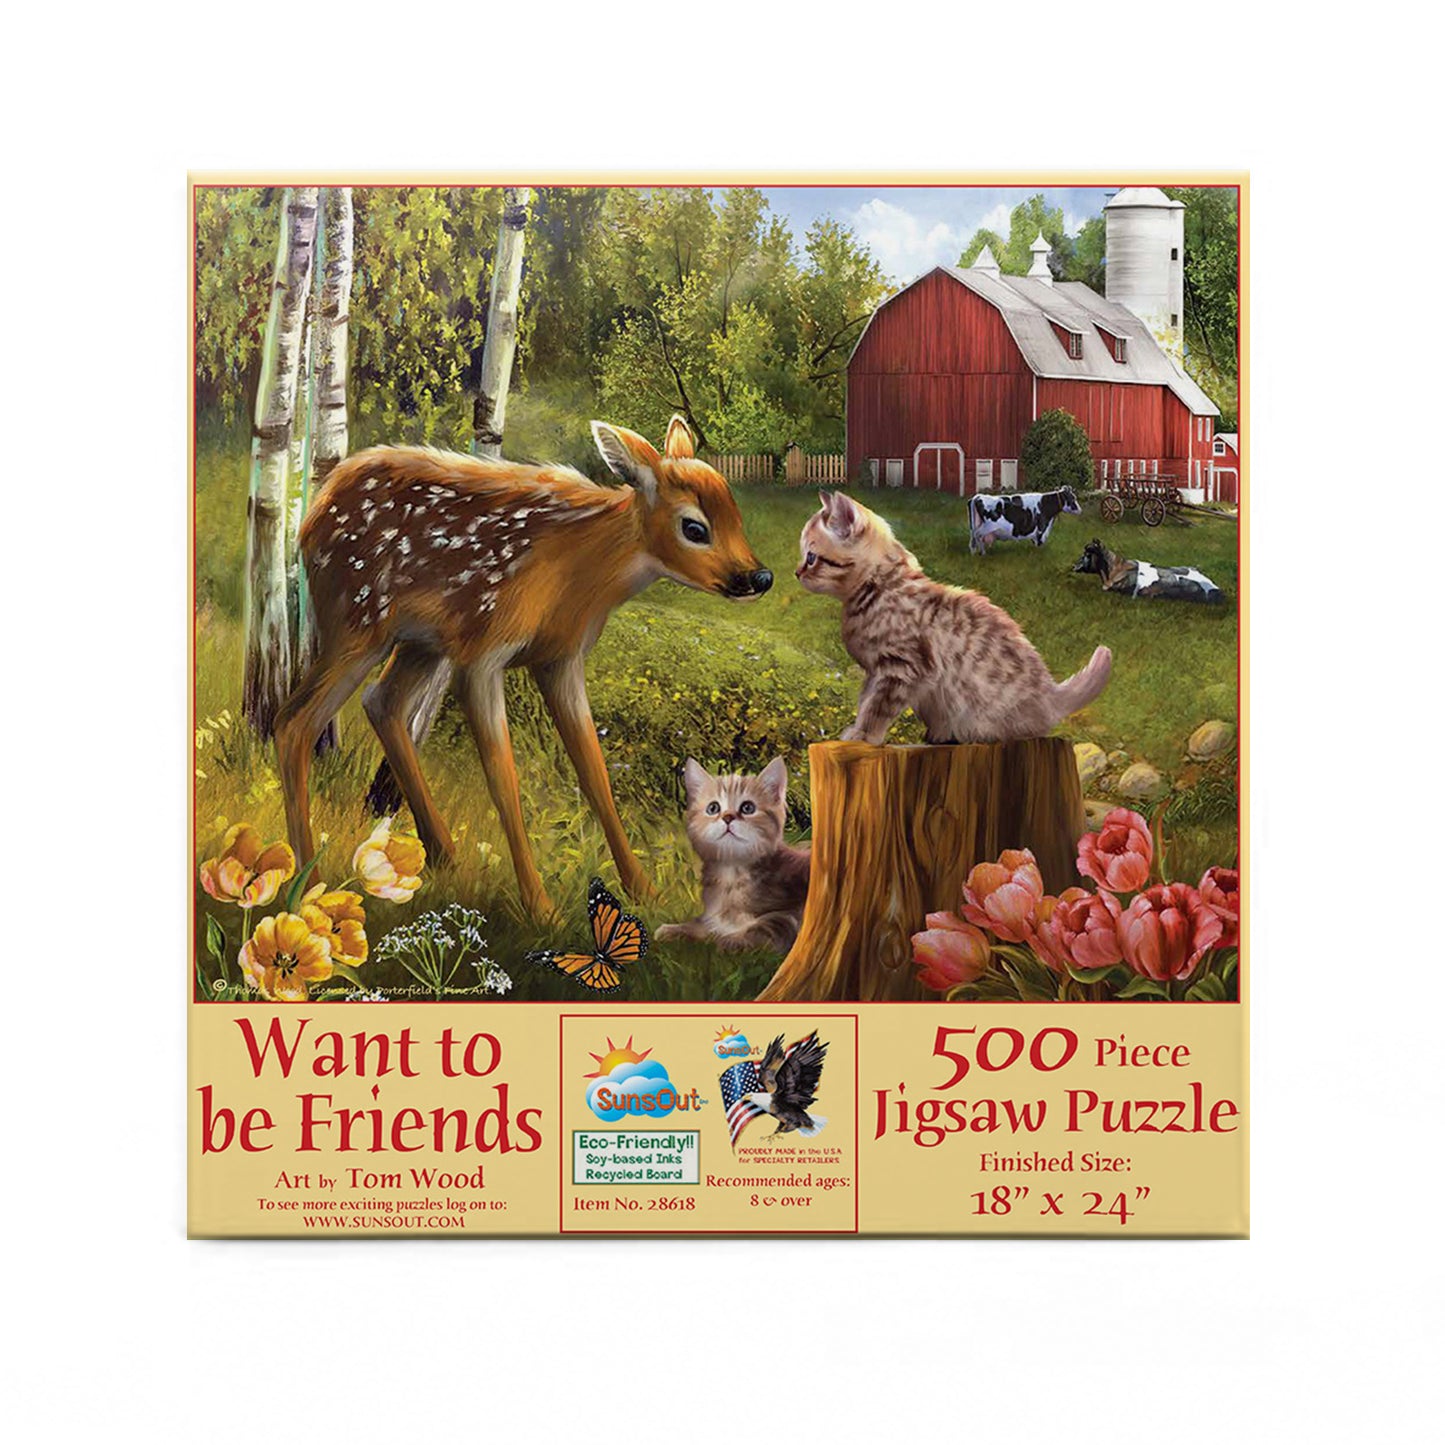 Want to be Friends - 500 Piece Jigsaw Puzzle